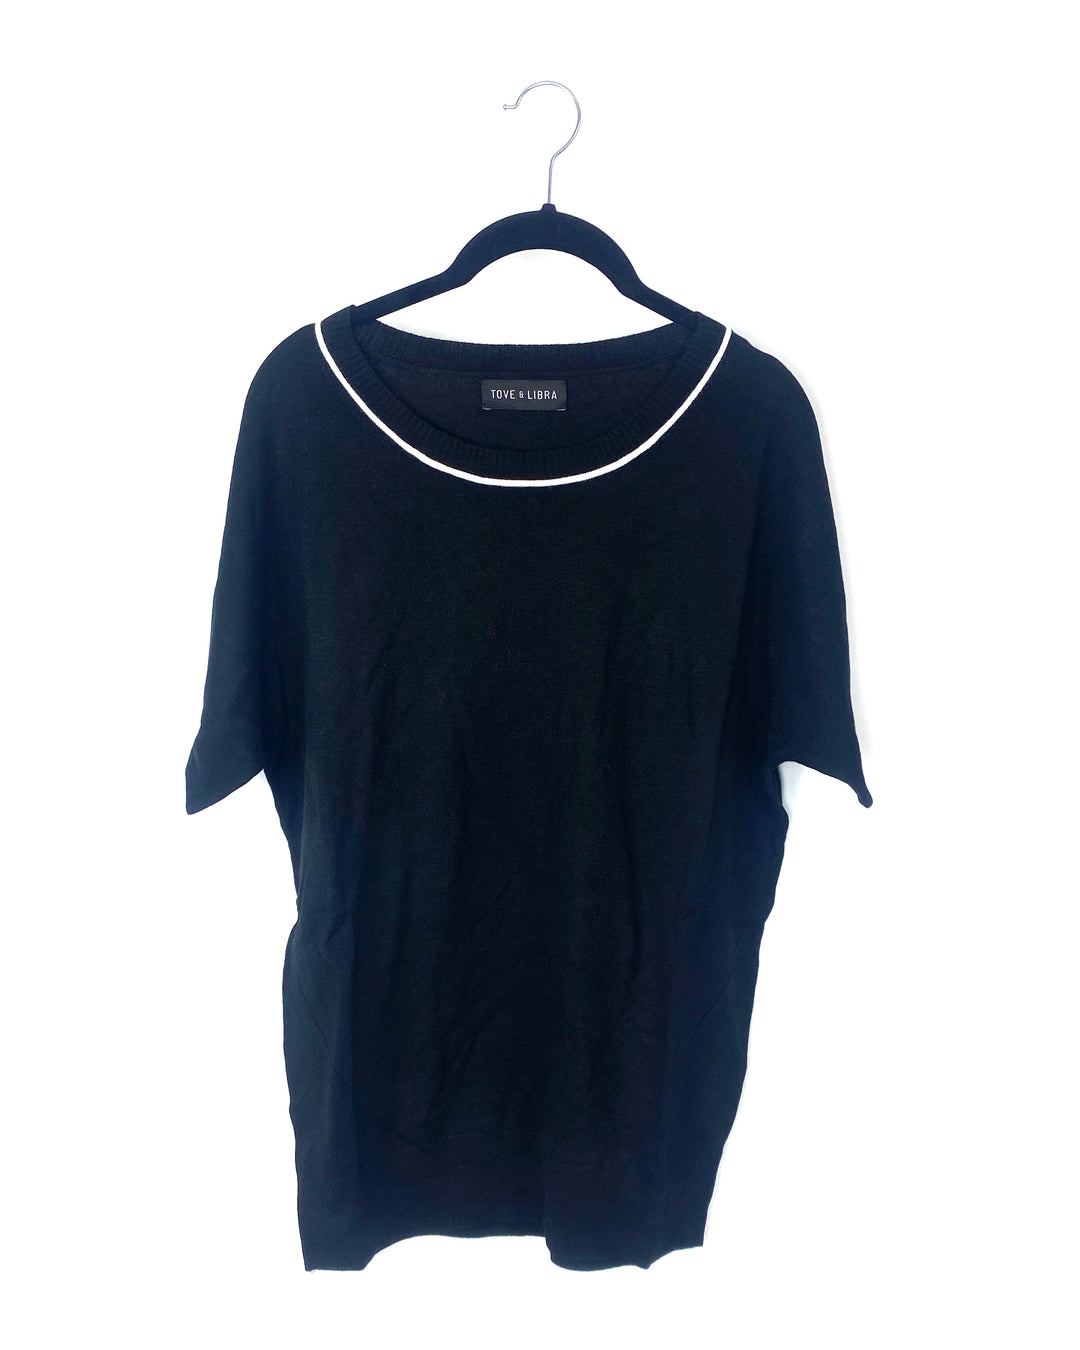 Black Knit  Top - Extra Small and Small